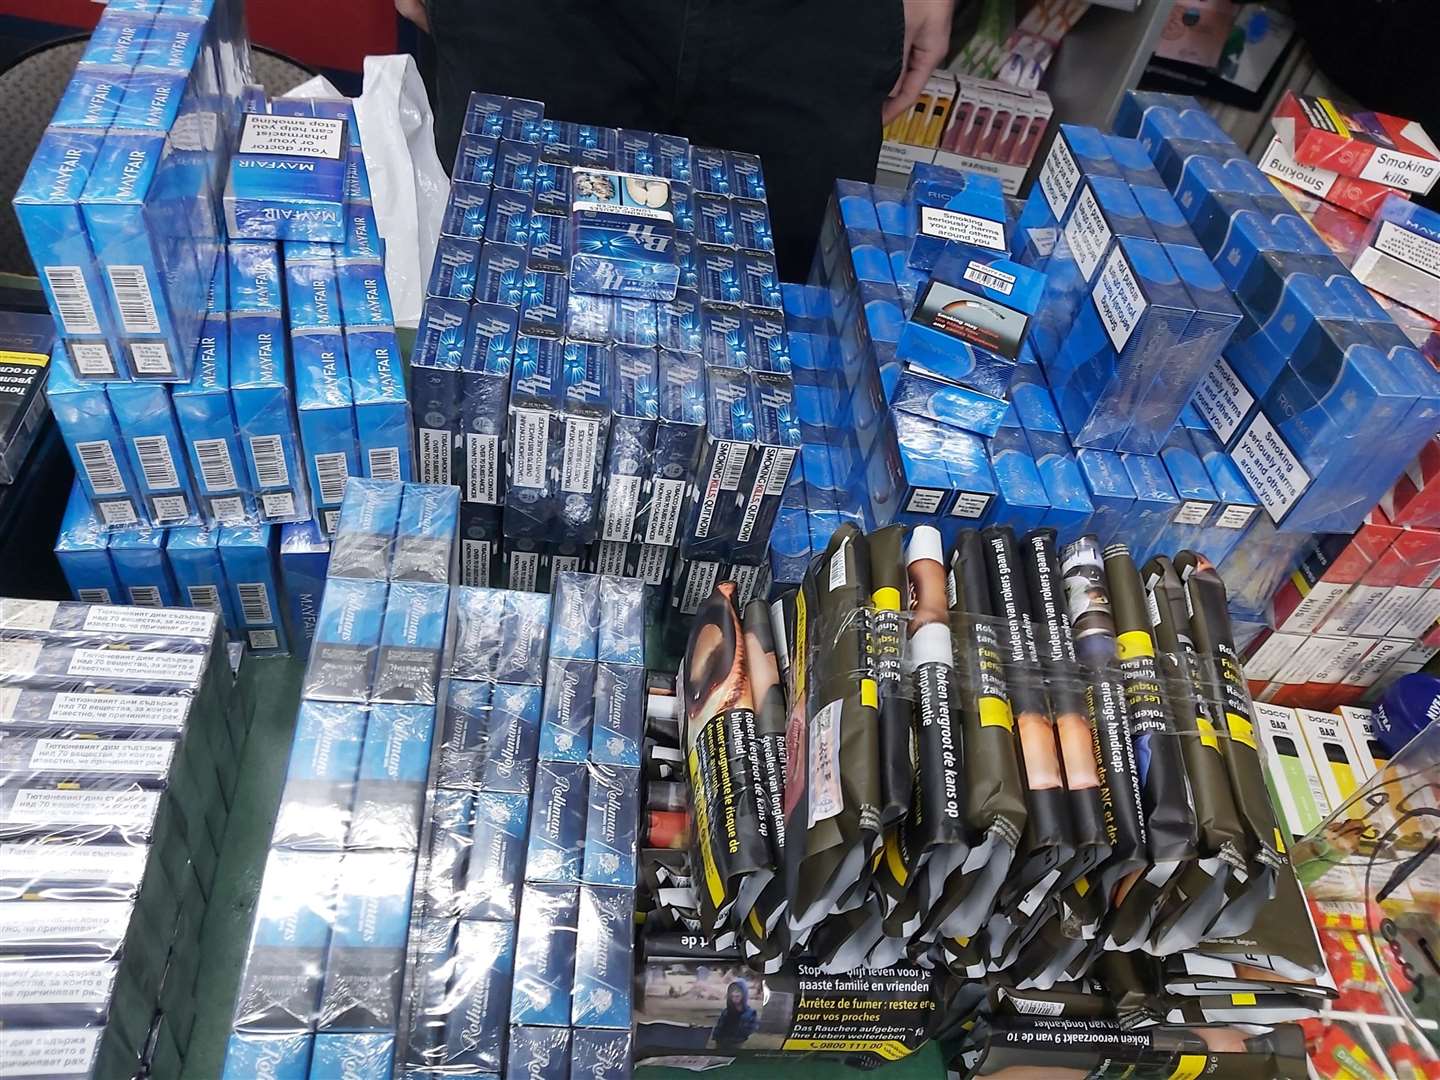 Illegal tobacco and cigarettes were seized from a shop in Maidstone. Picture: Kent Police